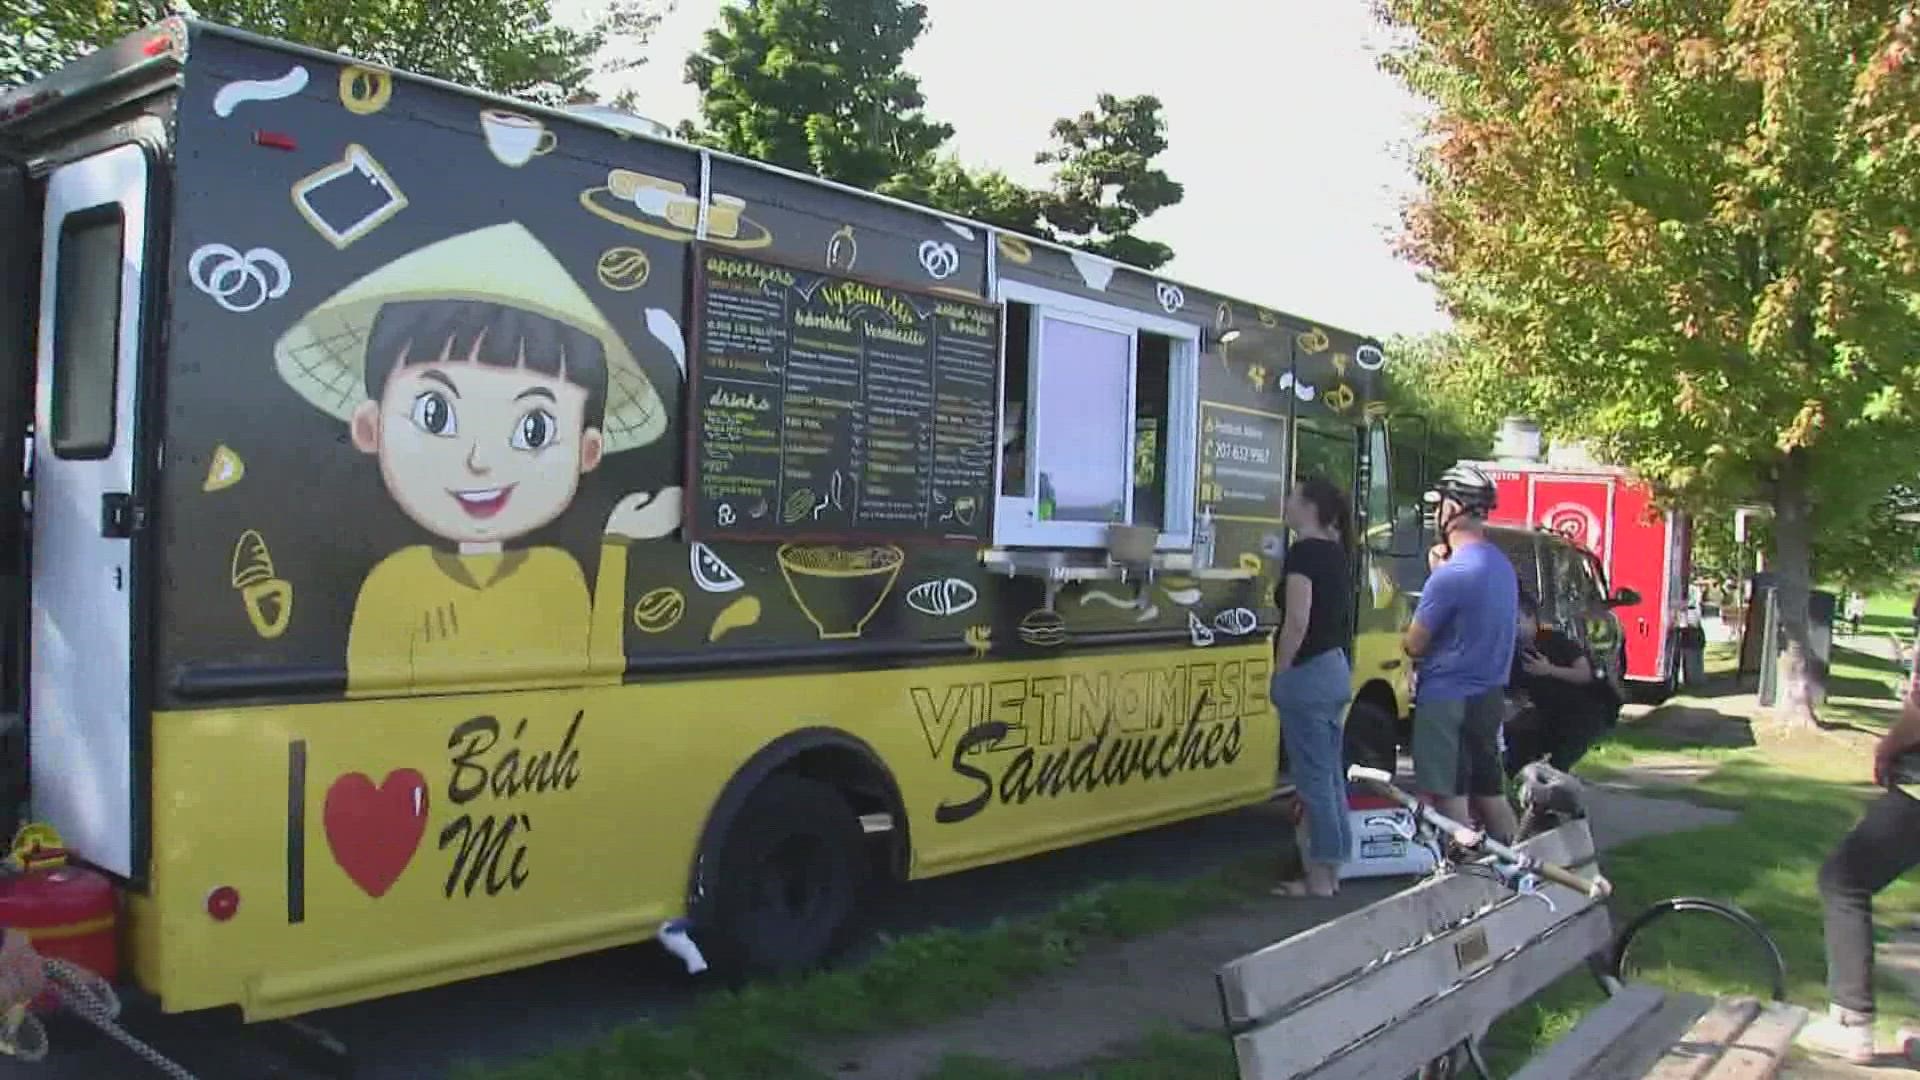 Ten food trucks secured a spot at the Eastern Promenade park this summer, leaving five food trucks uncertain about their businesses this summer.